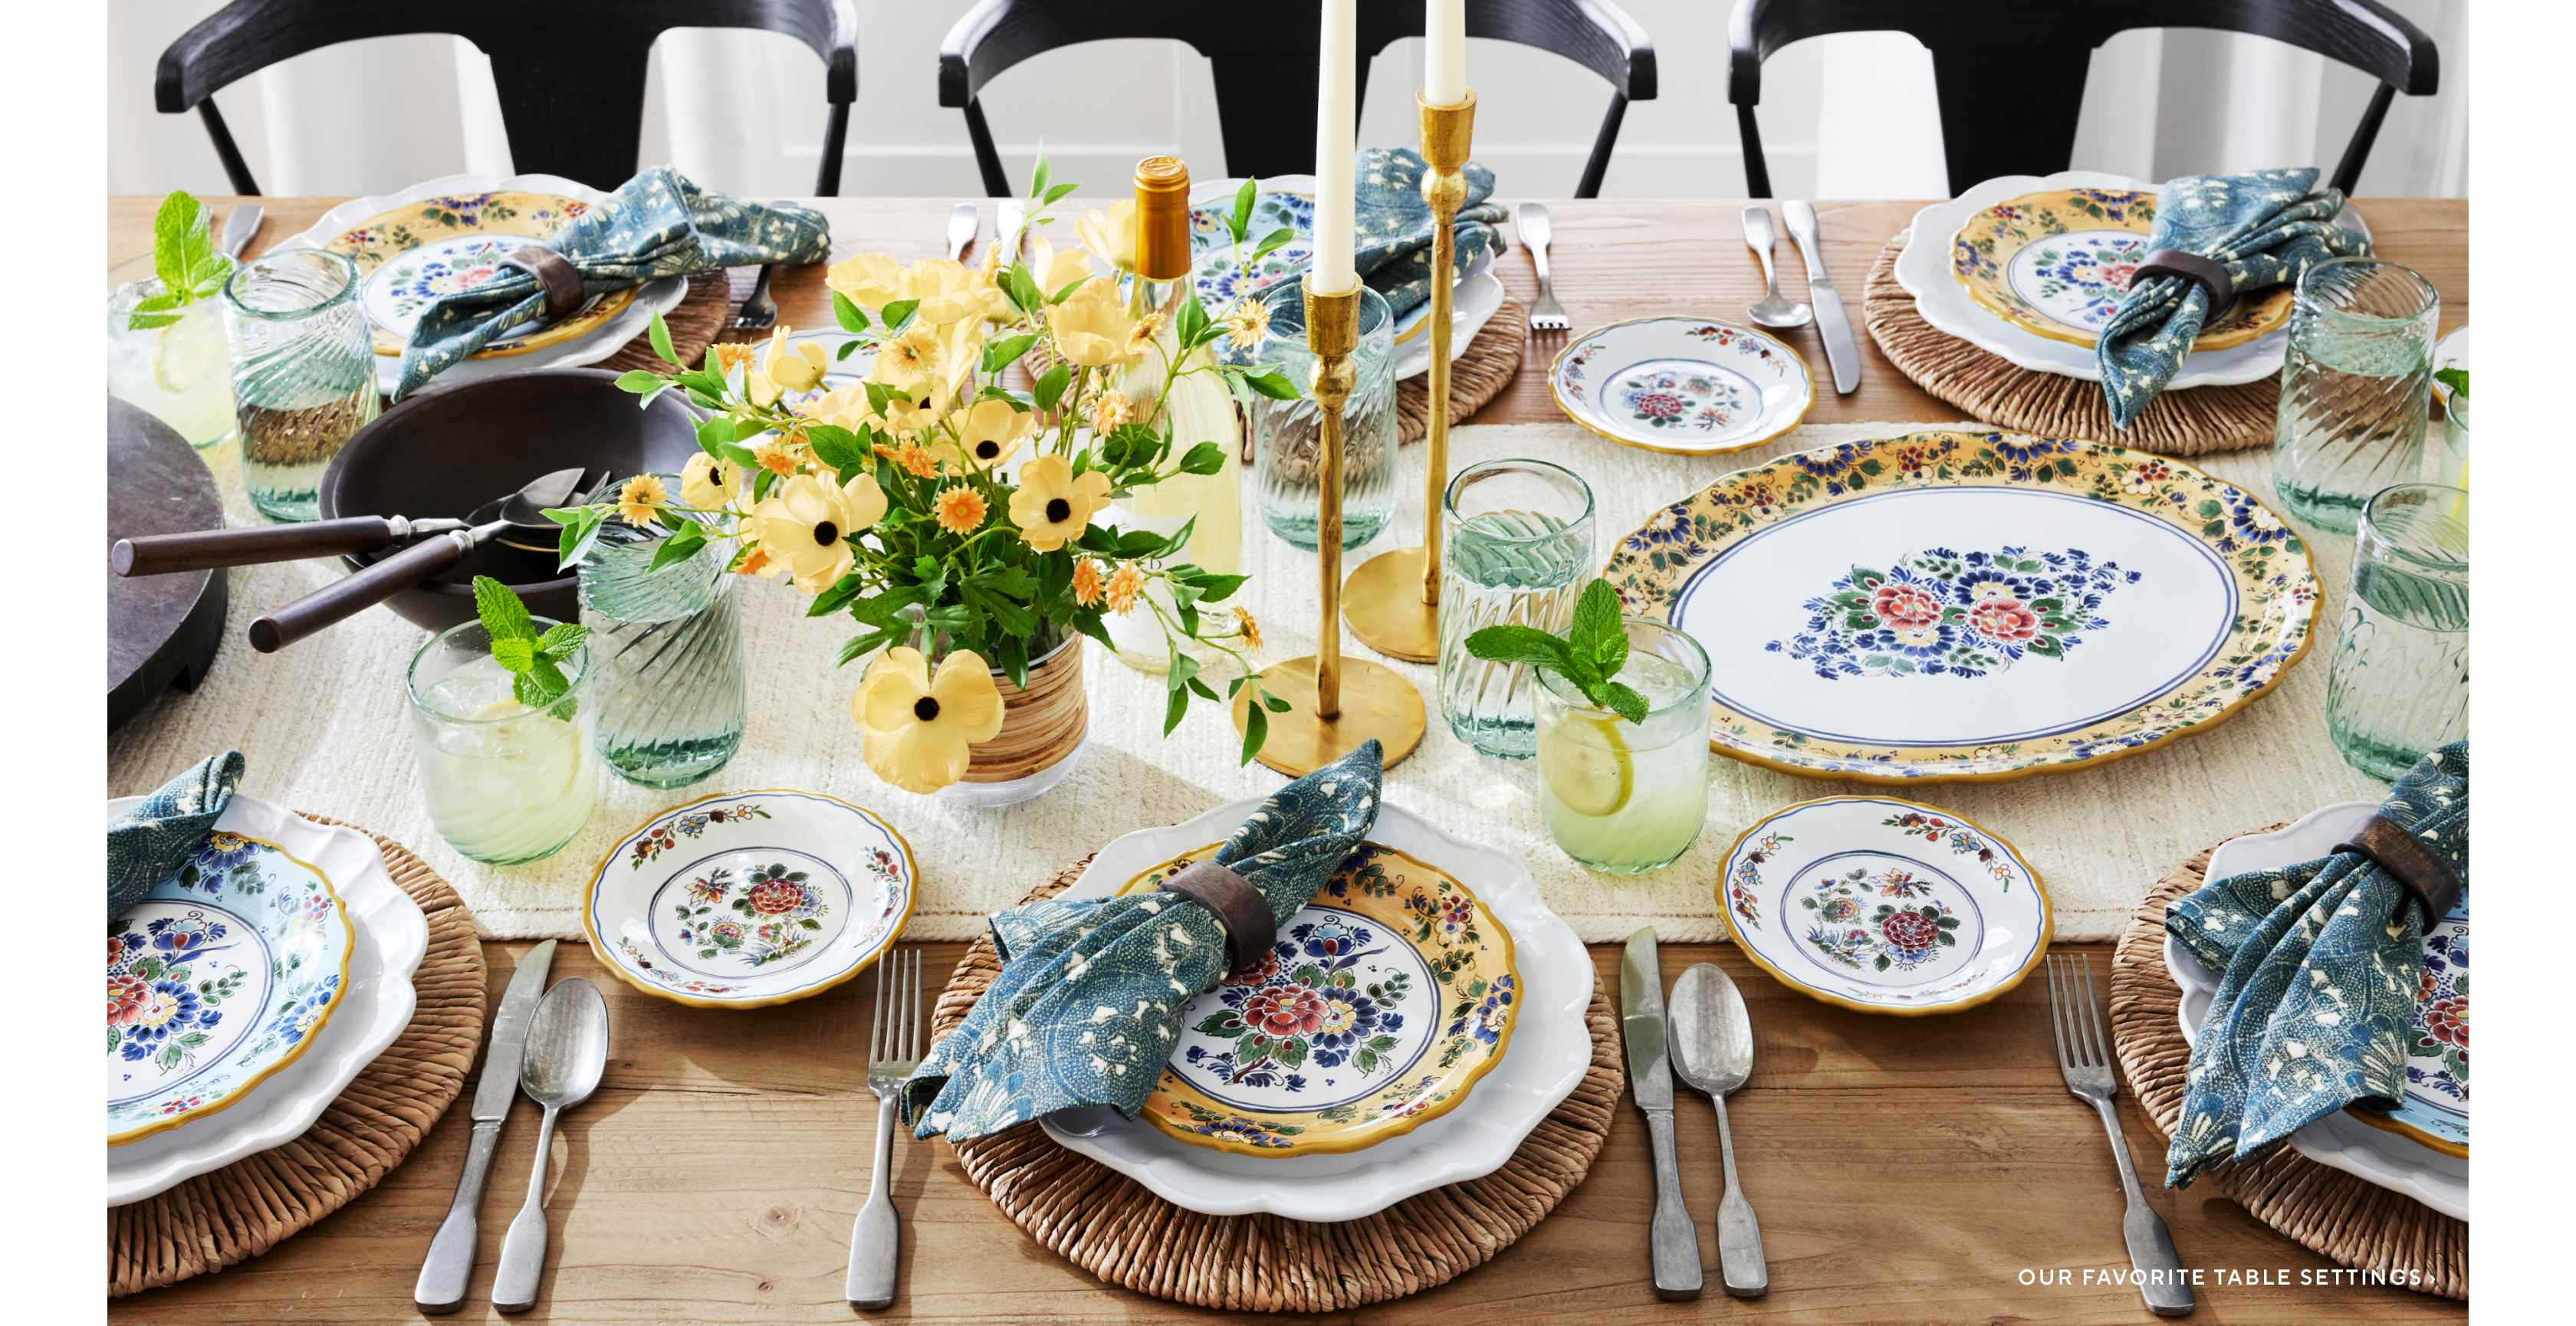 Our Favorite Table Settings